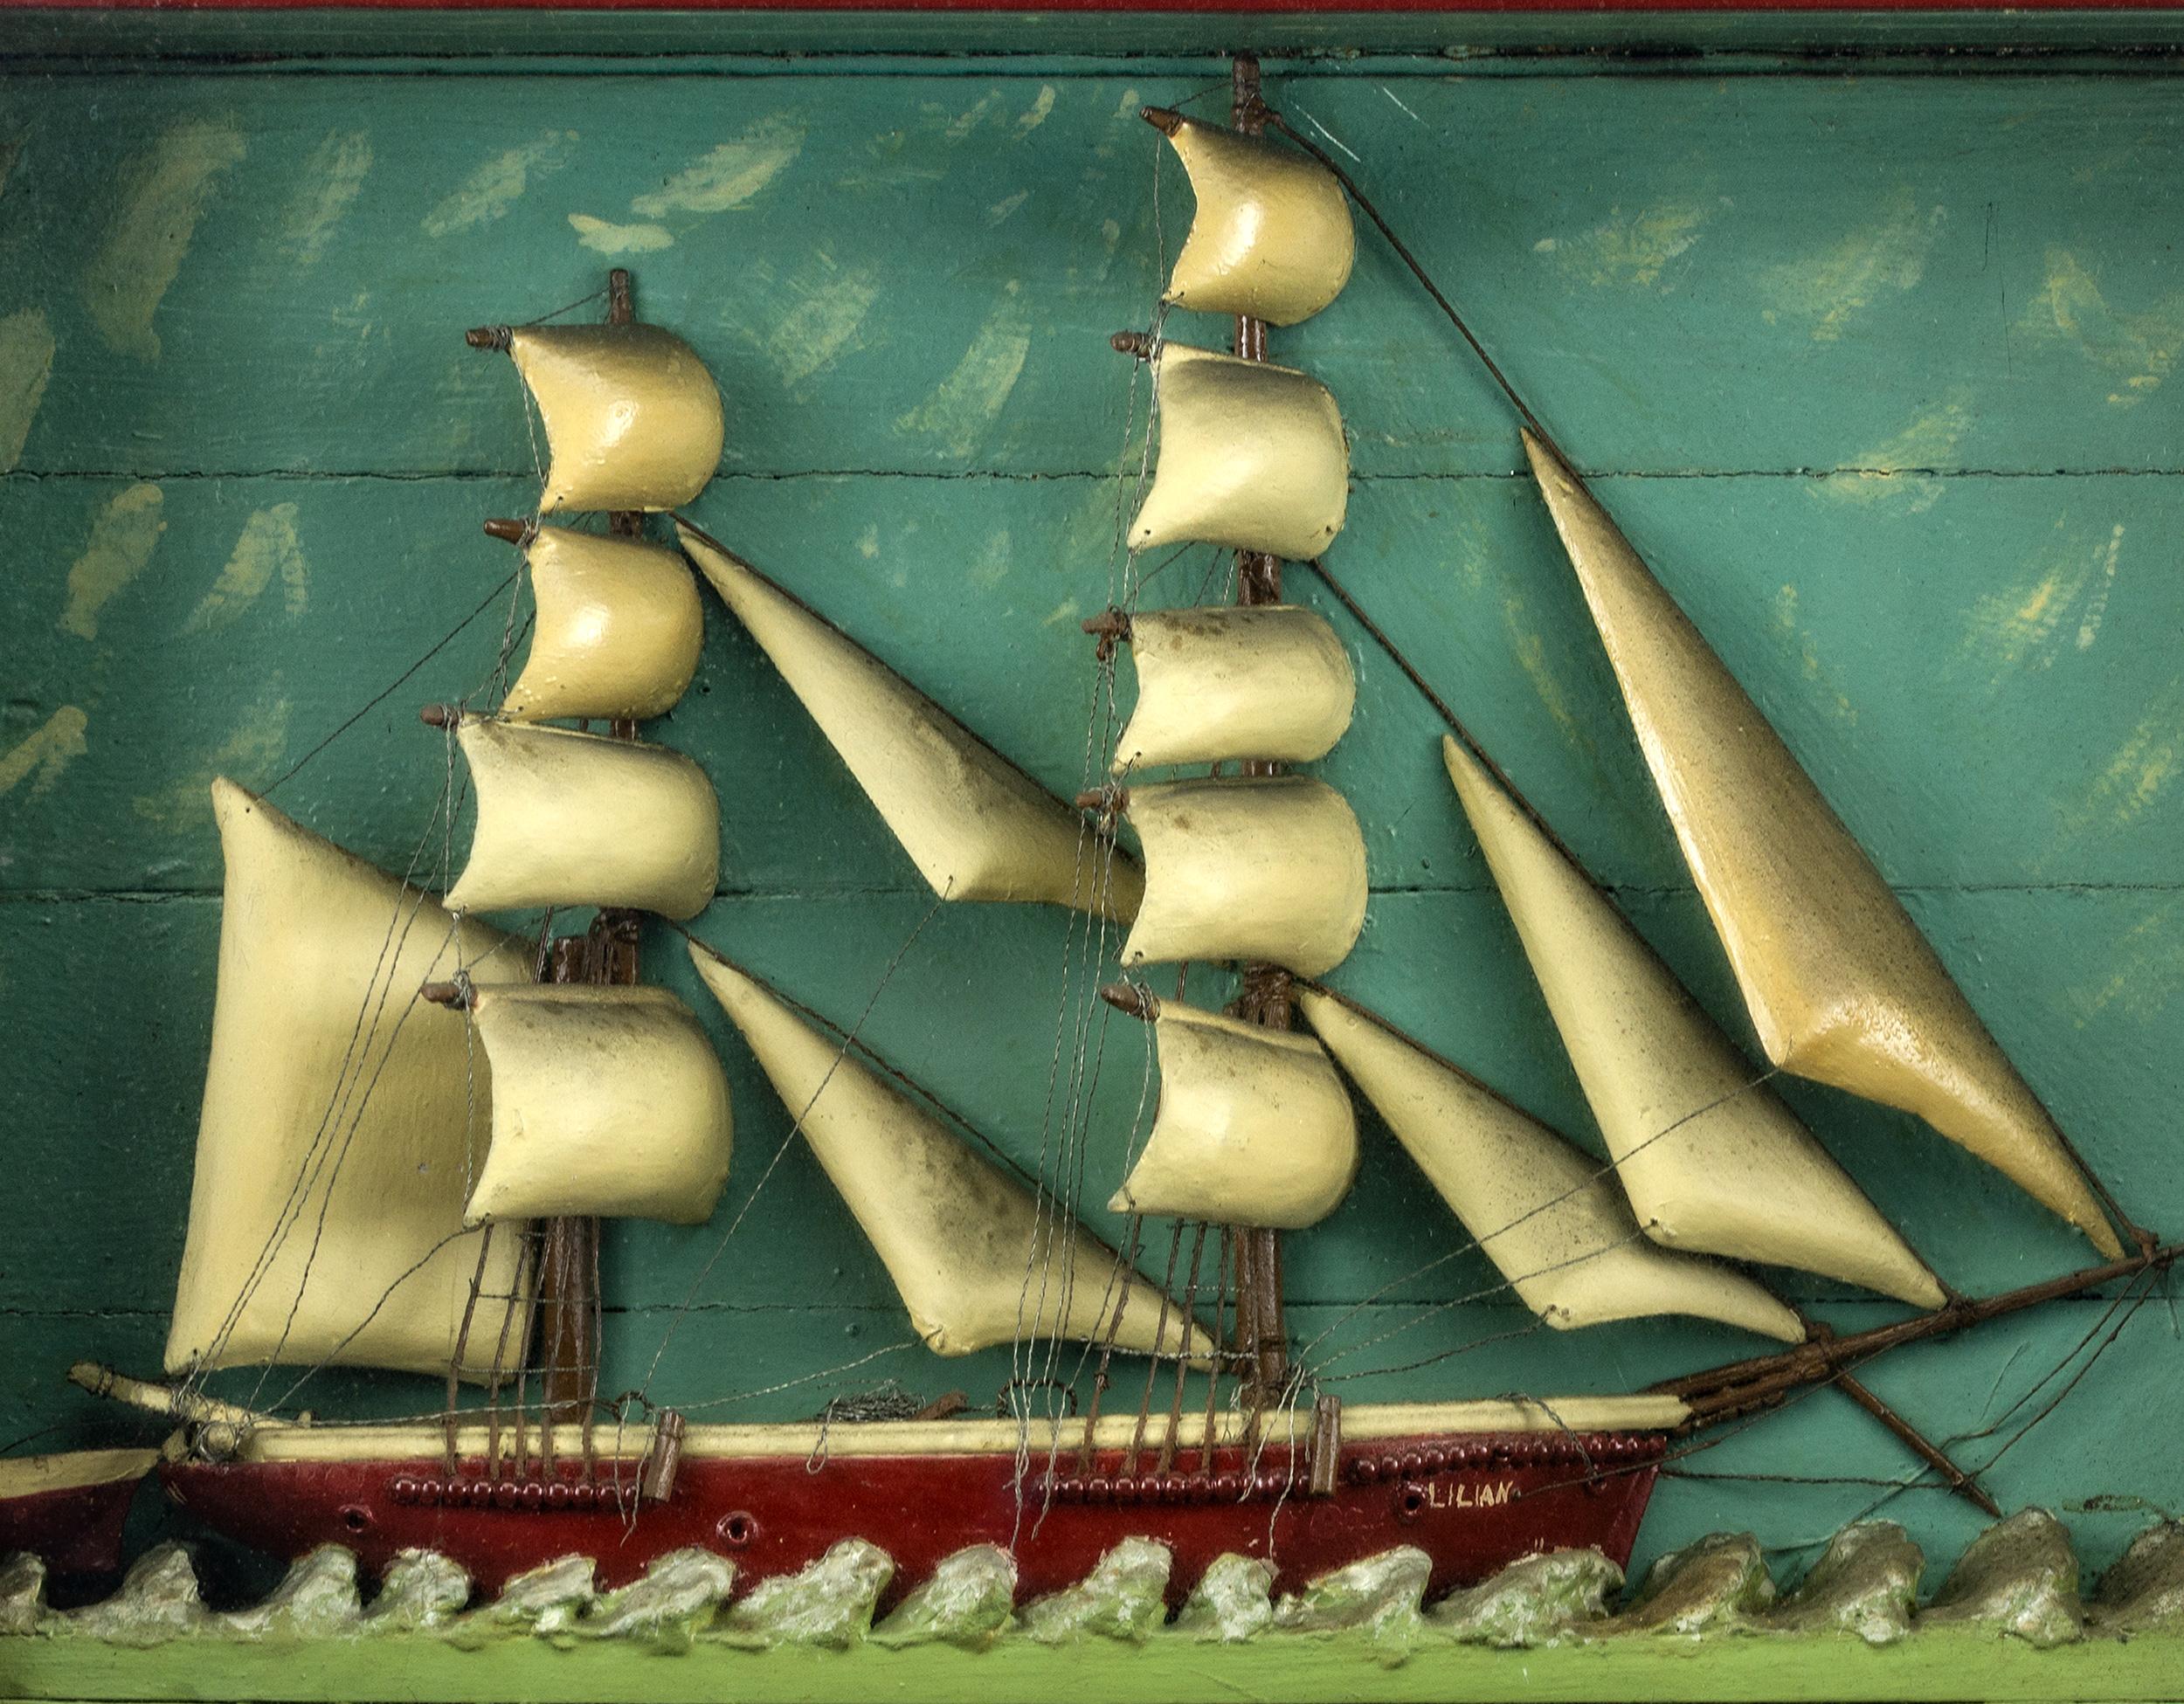 Shadow box ship diorama of two masted ship Lillian with matching rowboat, carved wooden sails and hull. Mounted in a red painted stepped frame. A great and
unusual ship diorama in untouched condition, New England, circa 1900.